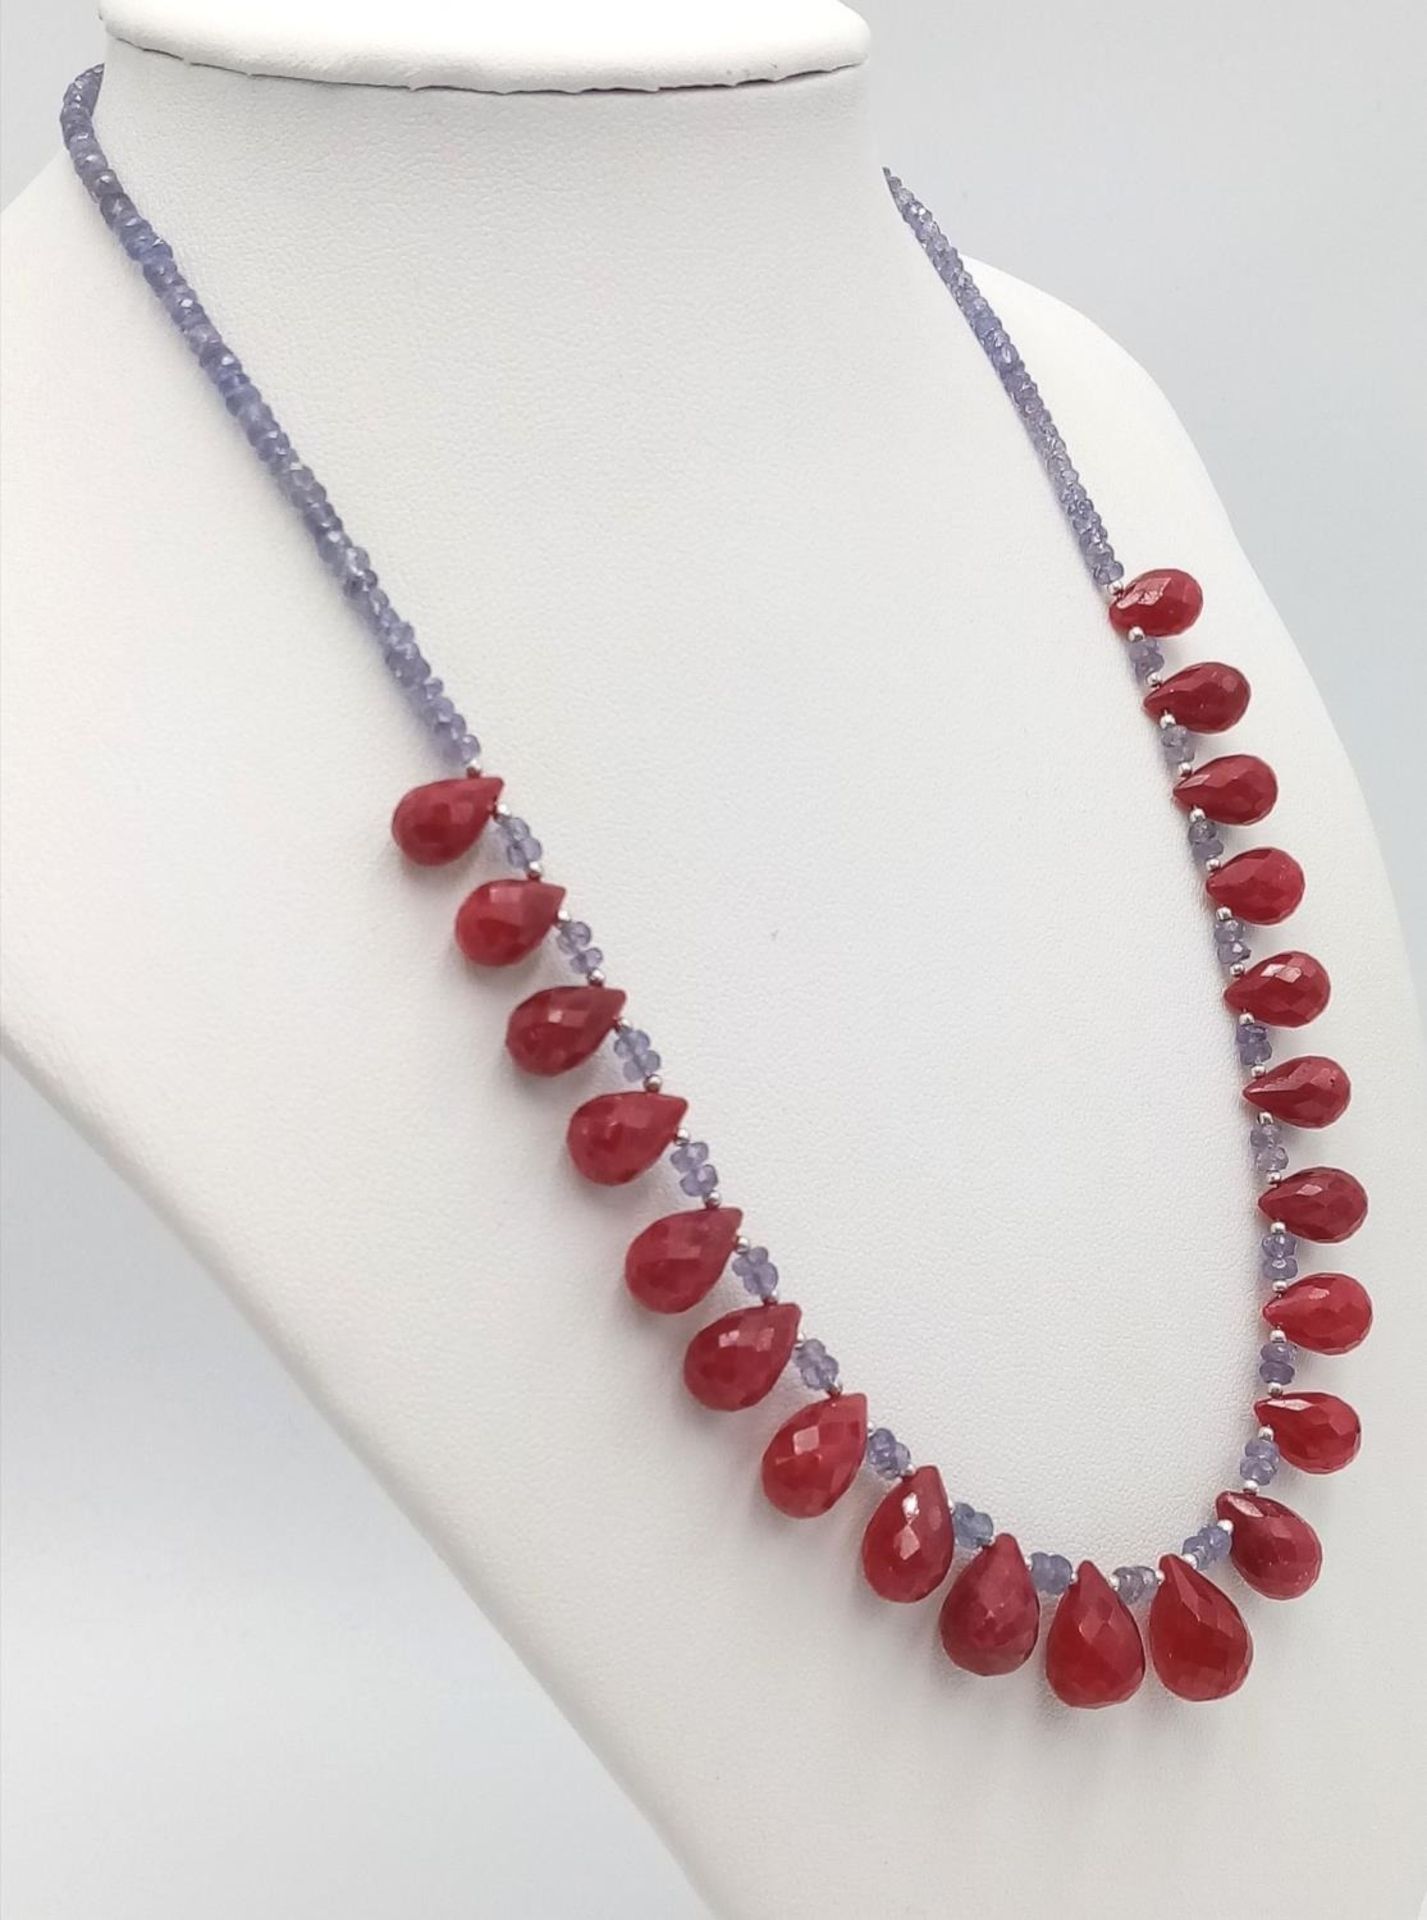 A Tanzanite Small Rondelle Necklace with Ruby Drops. 925 Silver Clasp. 150ctw gemstones. 42cm - Image 3 of 4